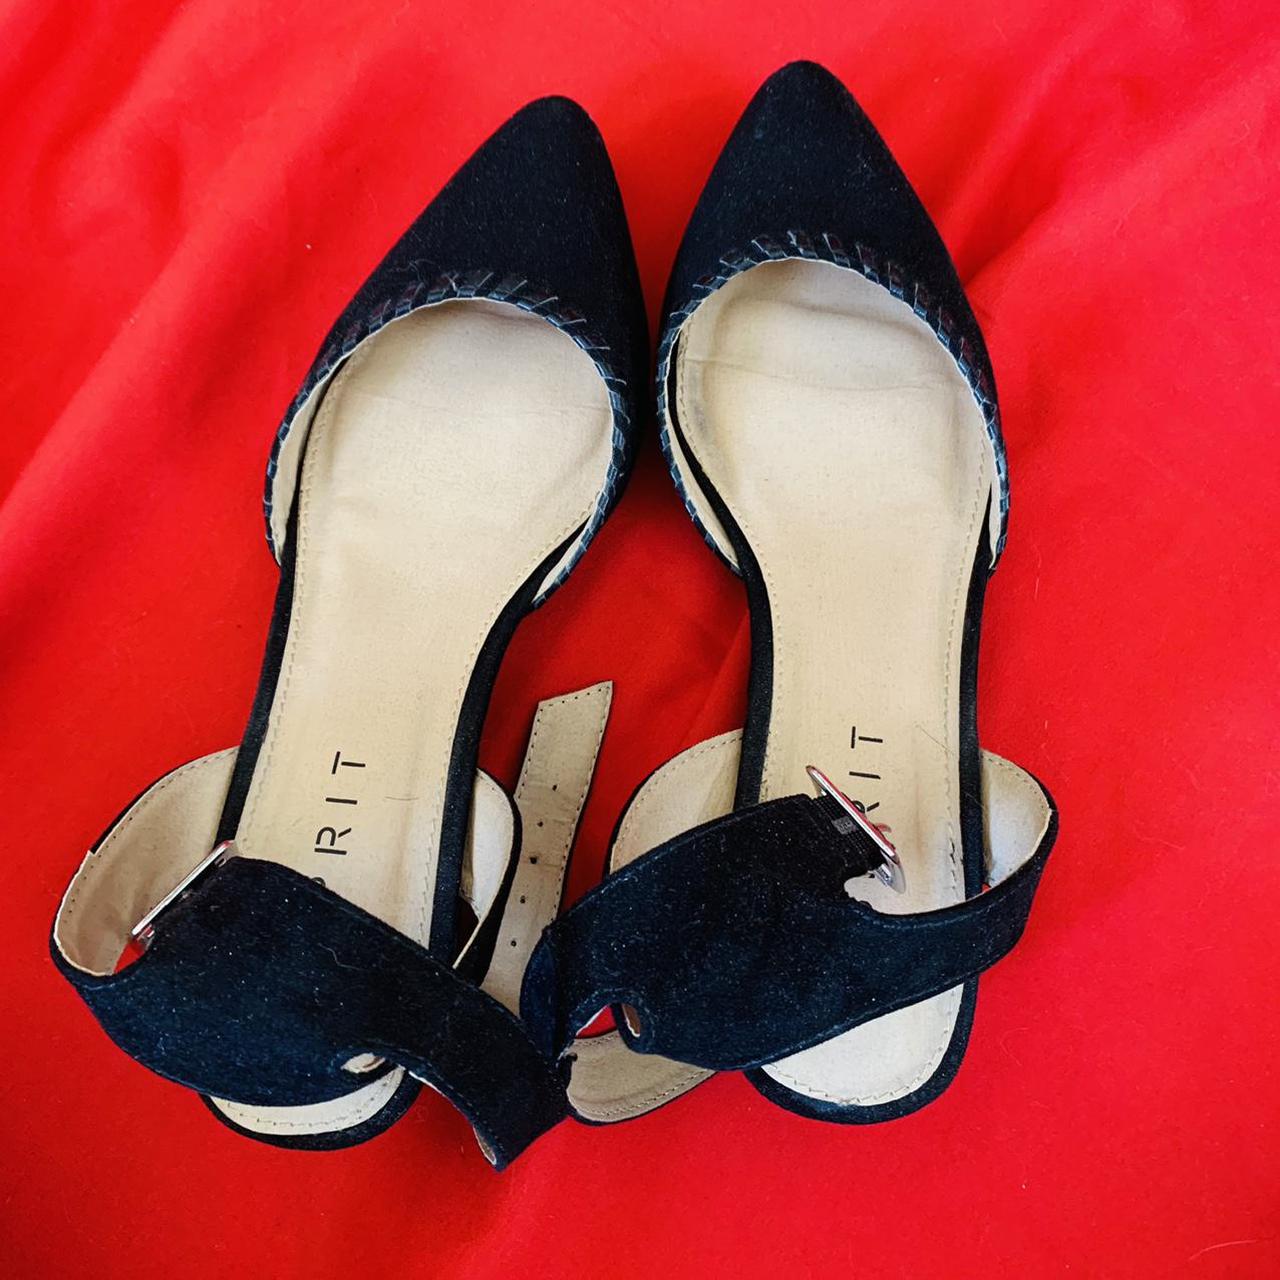 Product Image 2 - Beautiful black suede heels by